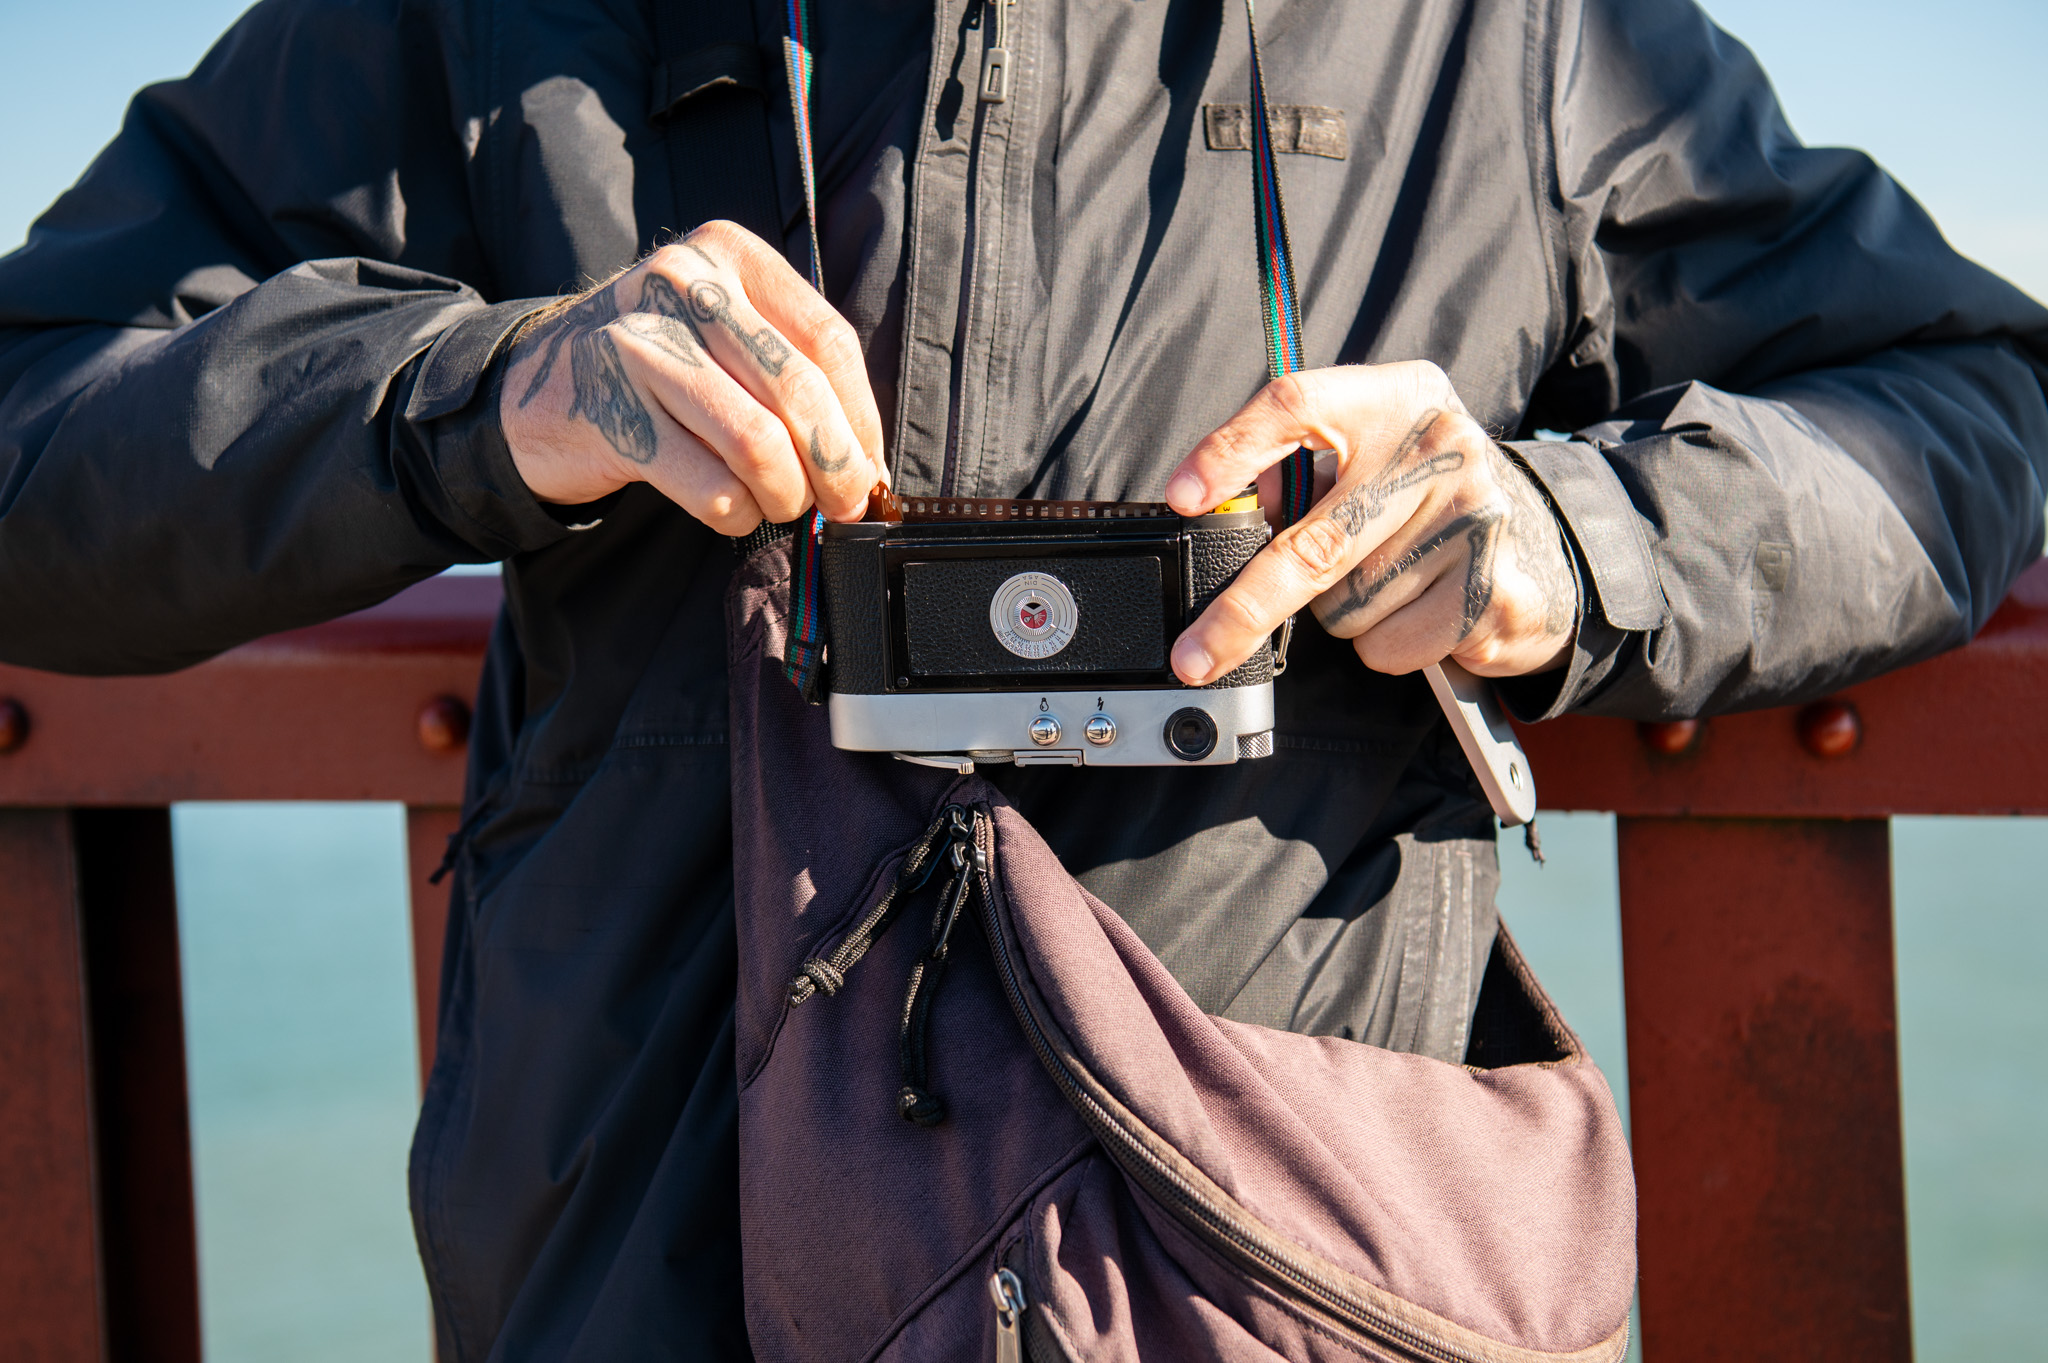 Jake Ricker loads a fresh roll of film into his camera on the pedestrian walkway of the Golden Gate Bridge on Monday, Dec. 12, 2023. Ricker currently has around 1,000 rolls of undeveloped film from the last two years of working on his photo project.